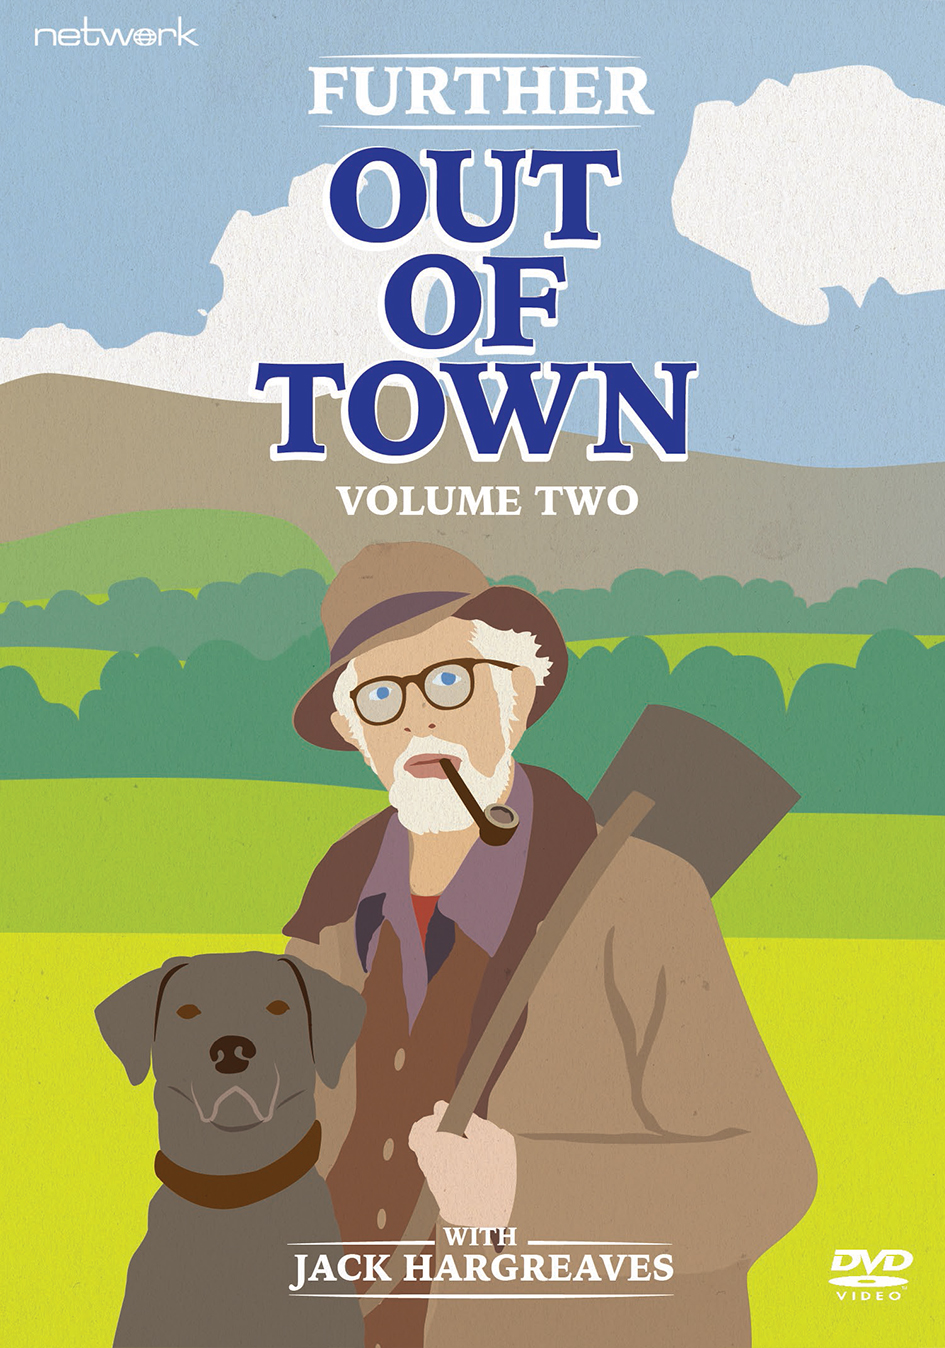 Further-Out-of-Town-Vol.2 DVD